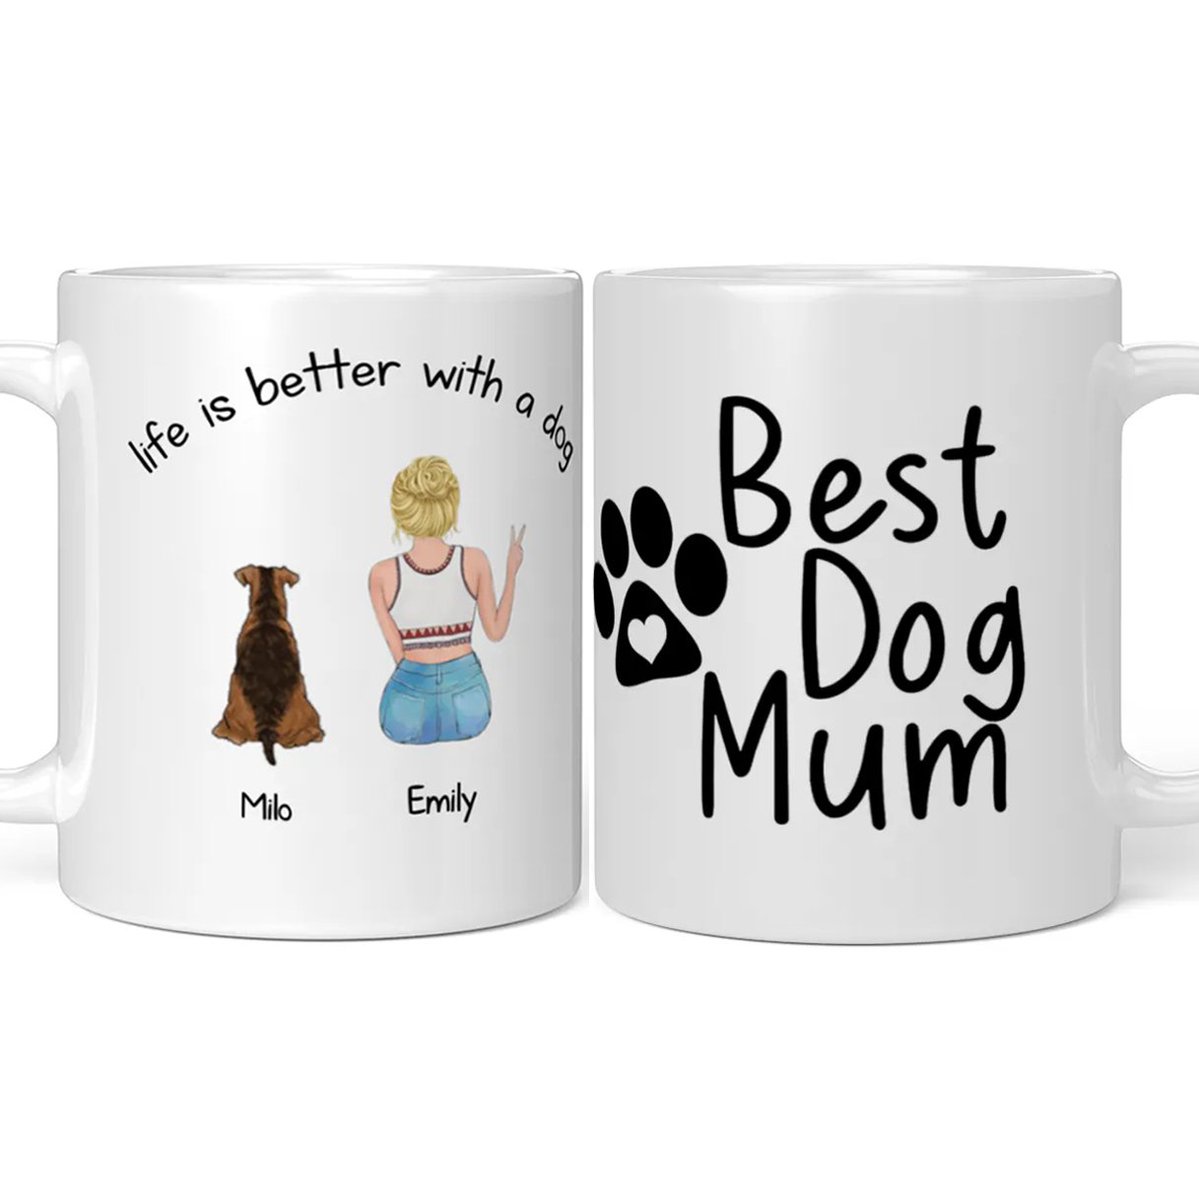 Perfect Mother's Day Gift for Dog Mom Order here ➡️ ducon.space/best-dog-mum-m… More here ➡️ ducon.space/collection/cus…